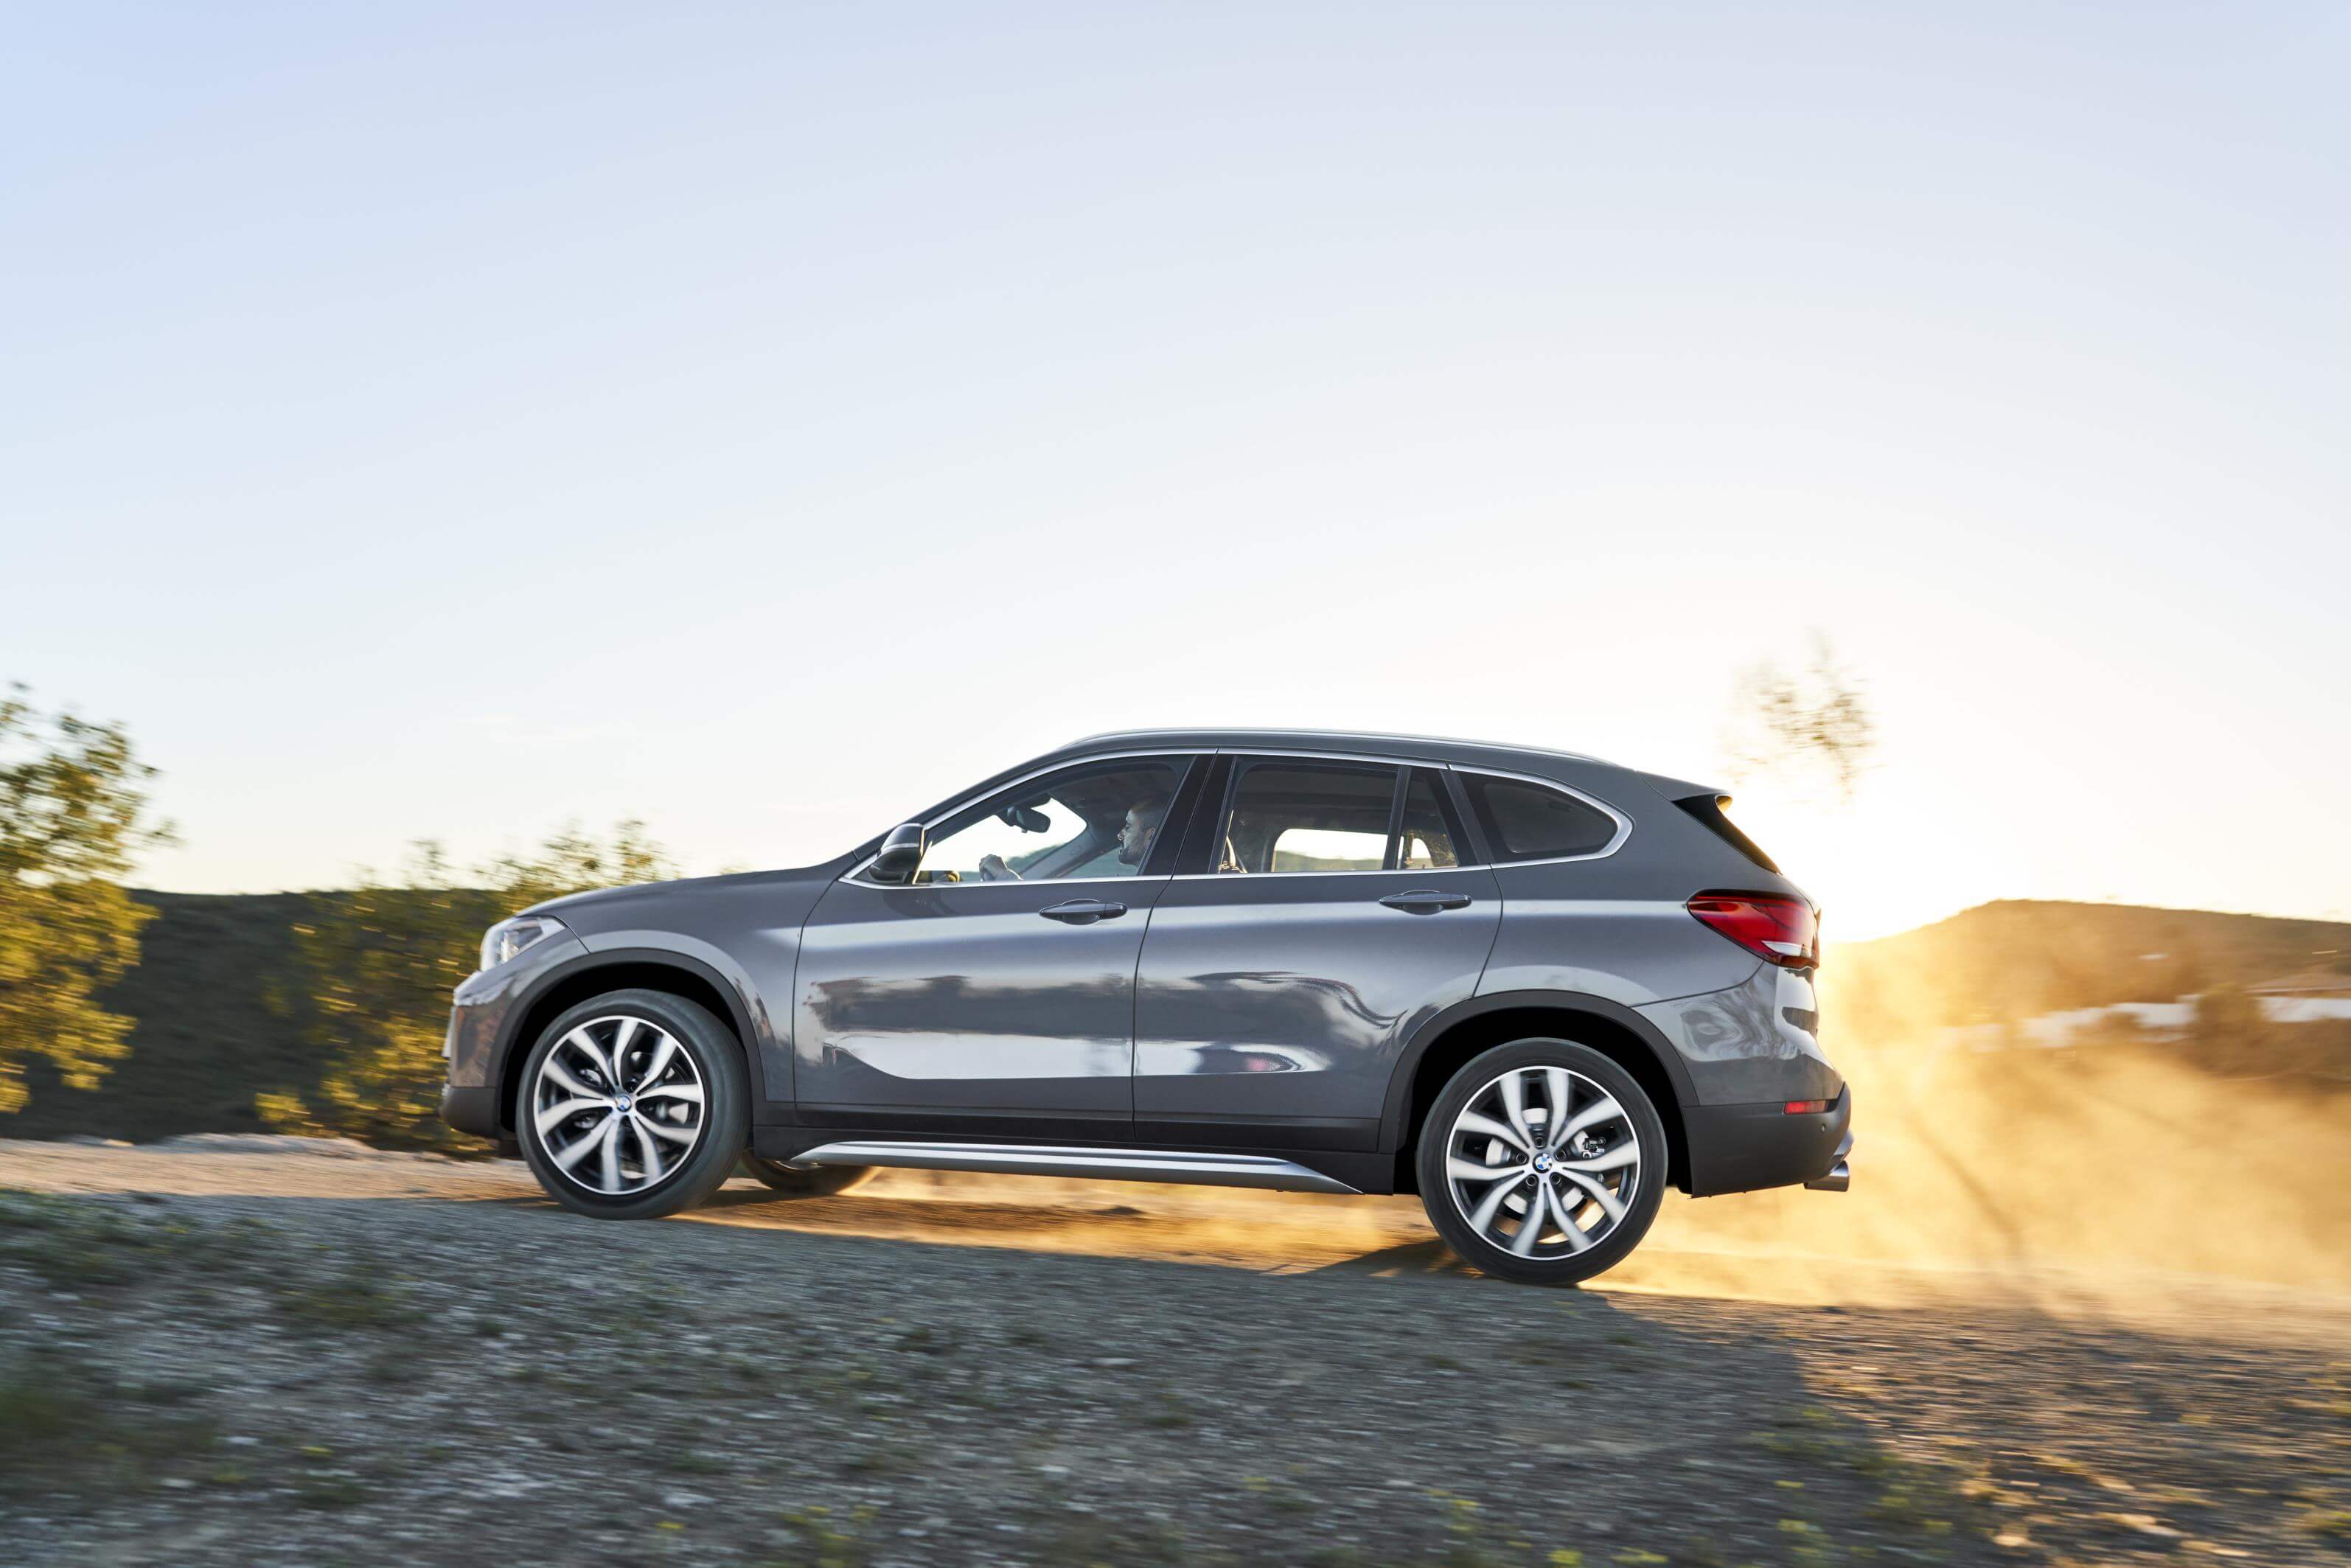 BMW X1 2019: lateral